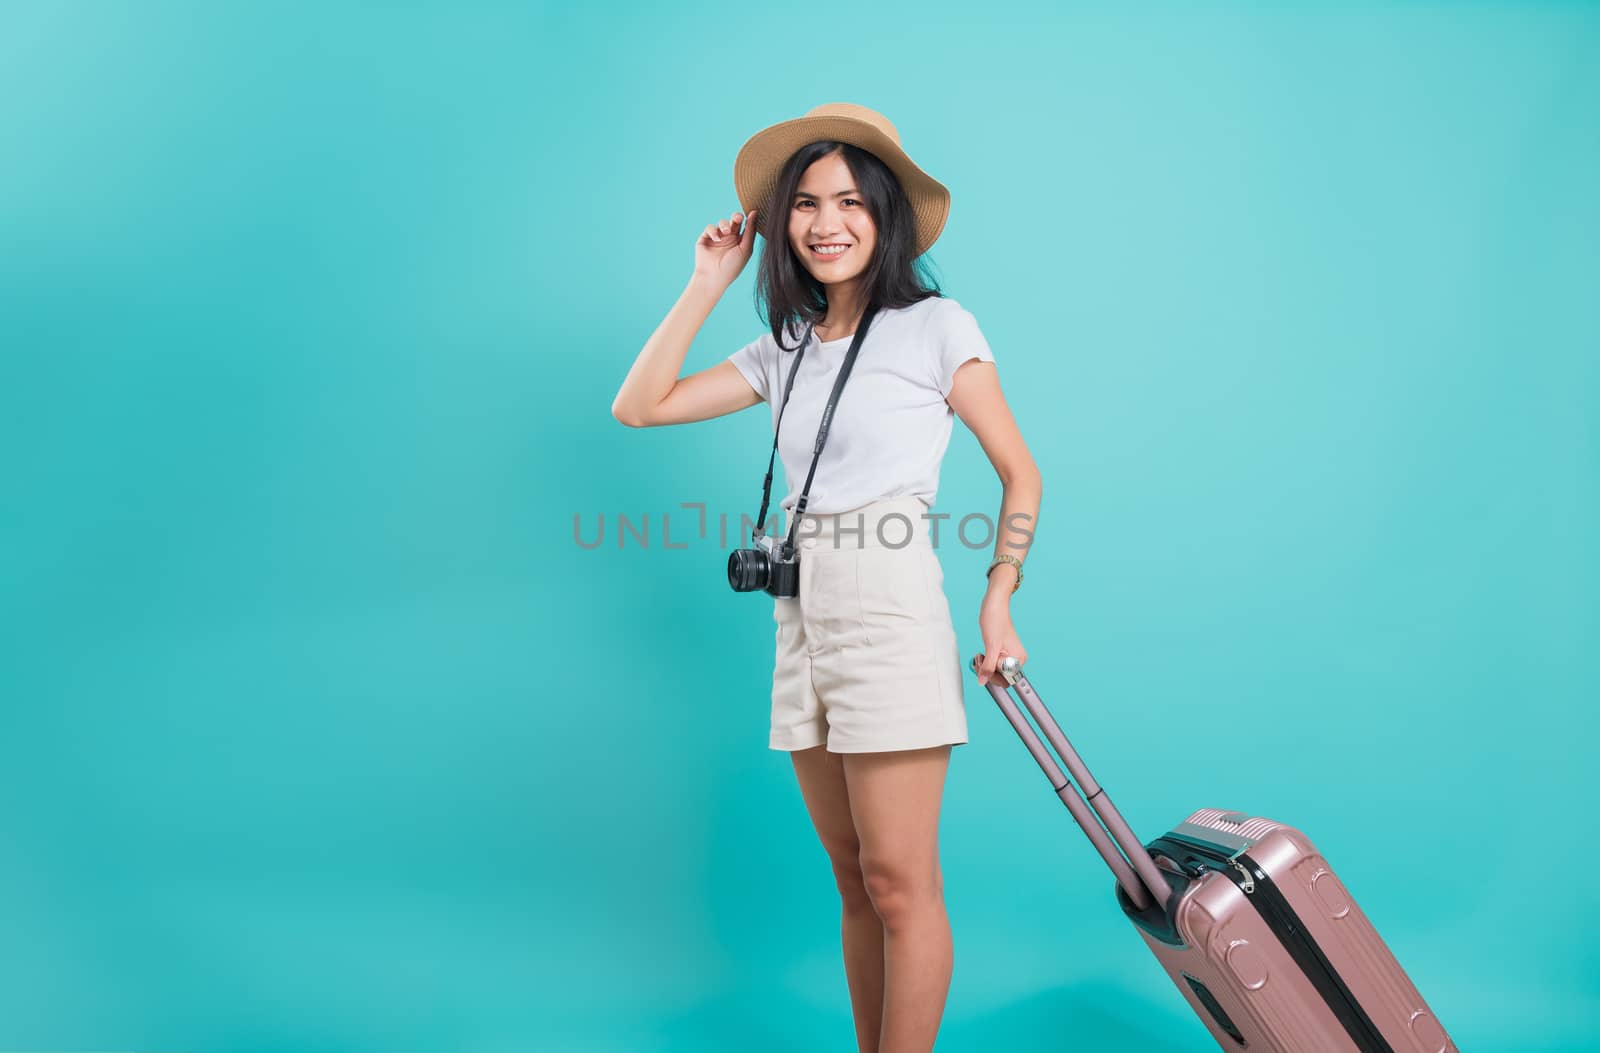 Traveler tourist happy Asian beautiful young woman standing wear white t-shirt, holidays travel concept, her holding suitcase bag and photo mirrorless camera, shoot photo in studio on blue background